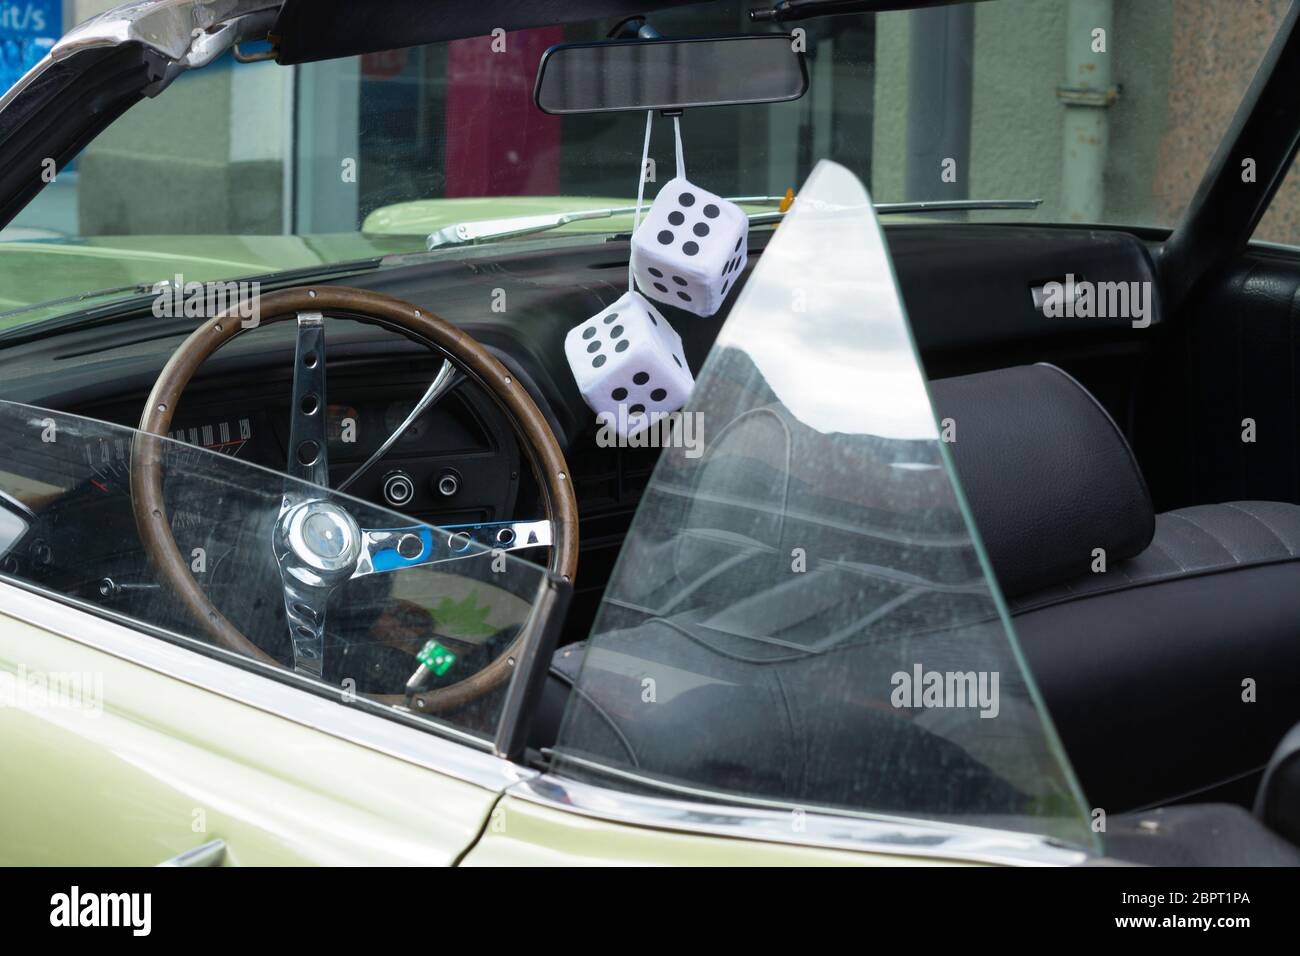 Fuzzy Dice on the rearview mirror of a vintage American car Stock Photo